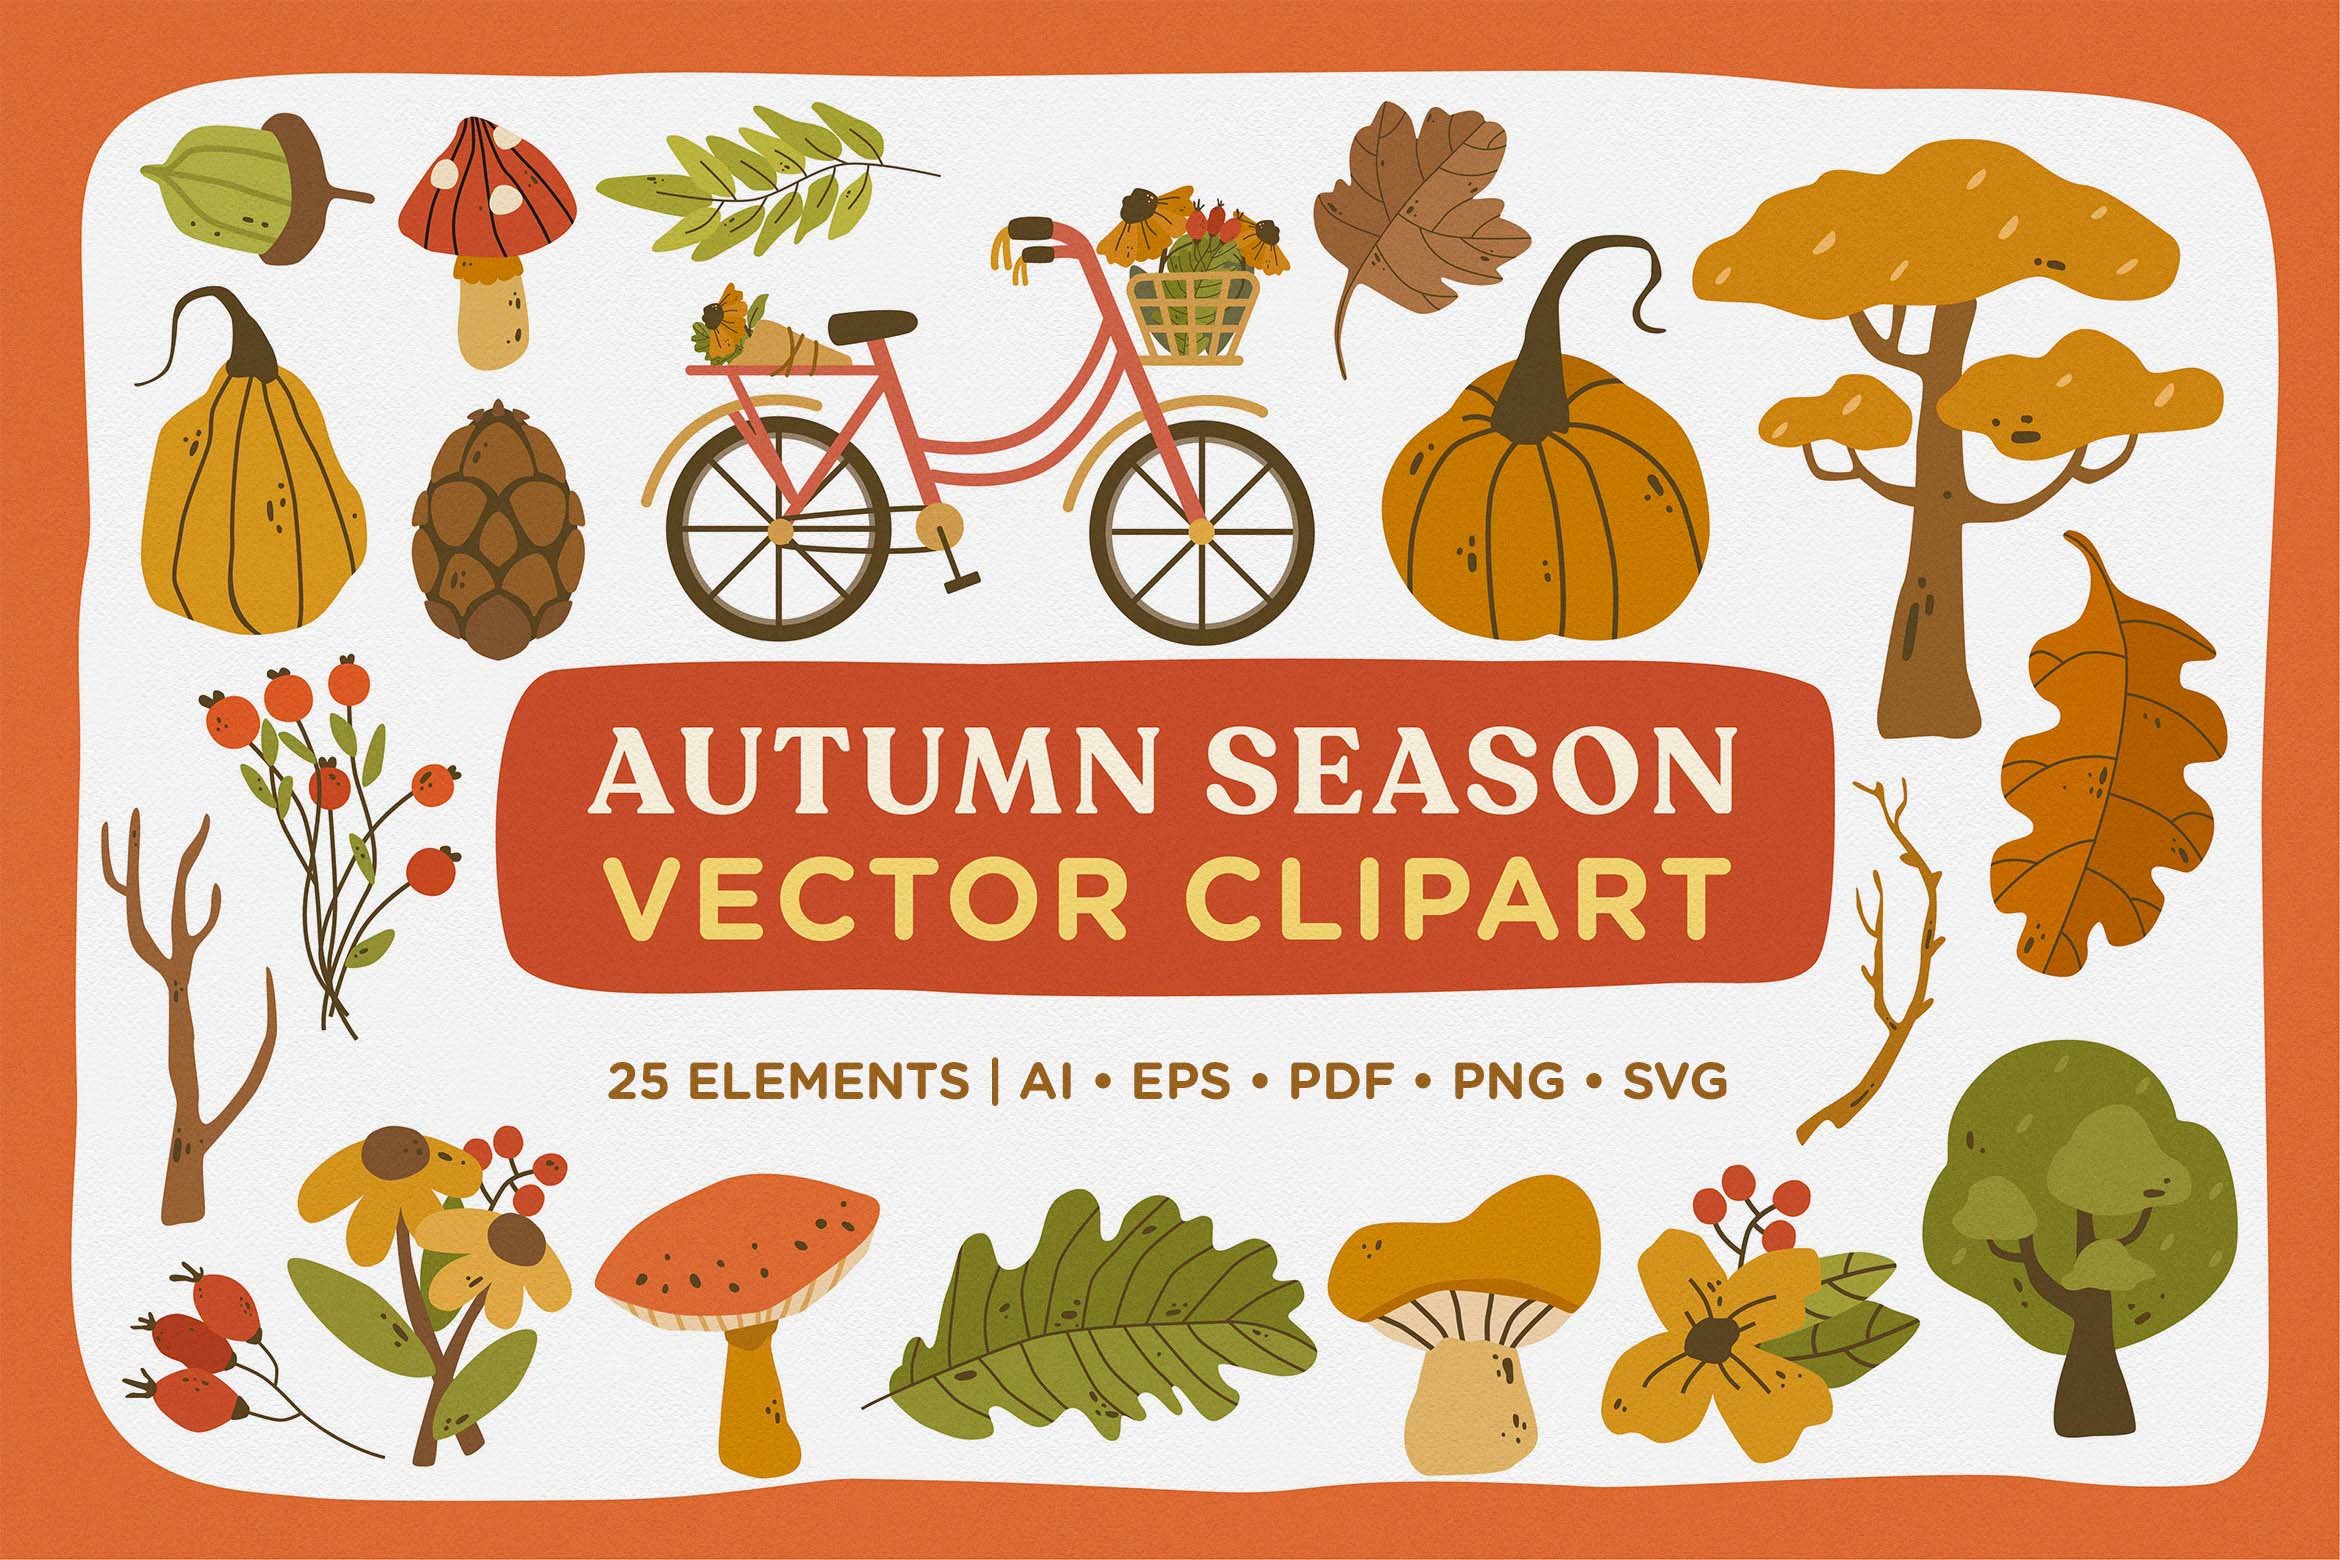 Autumn Season Vector Clipart Pack cover image.